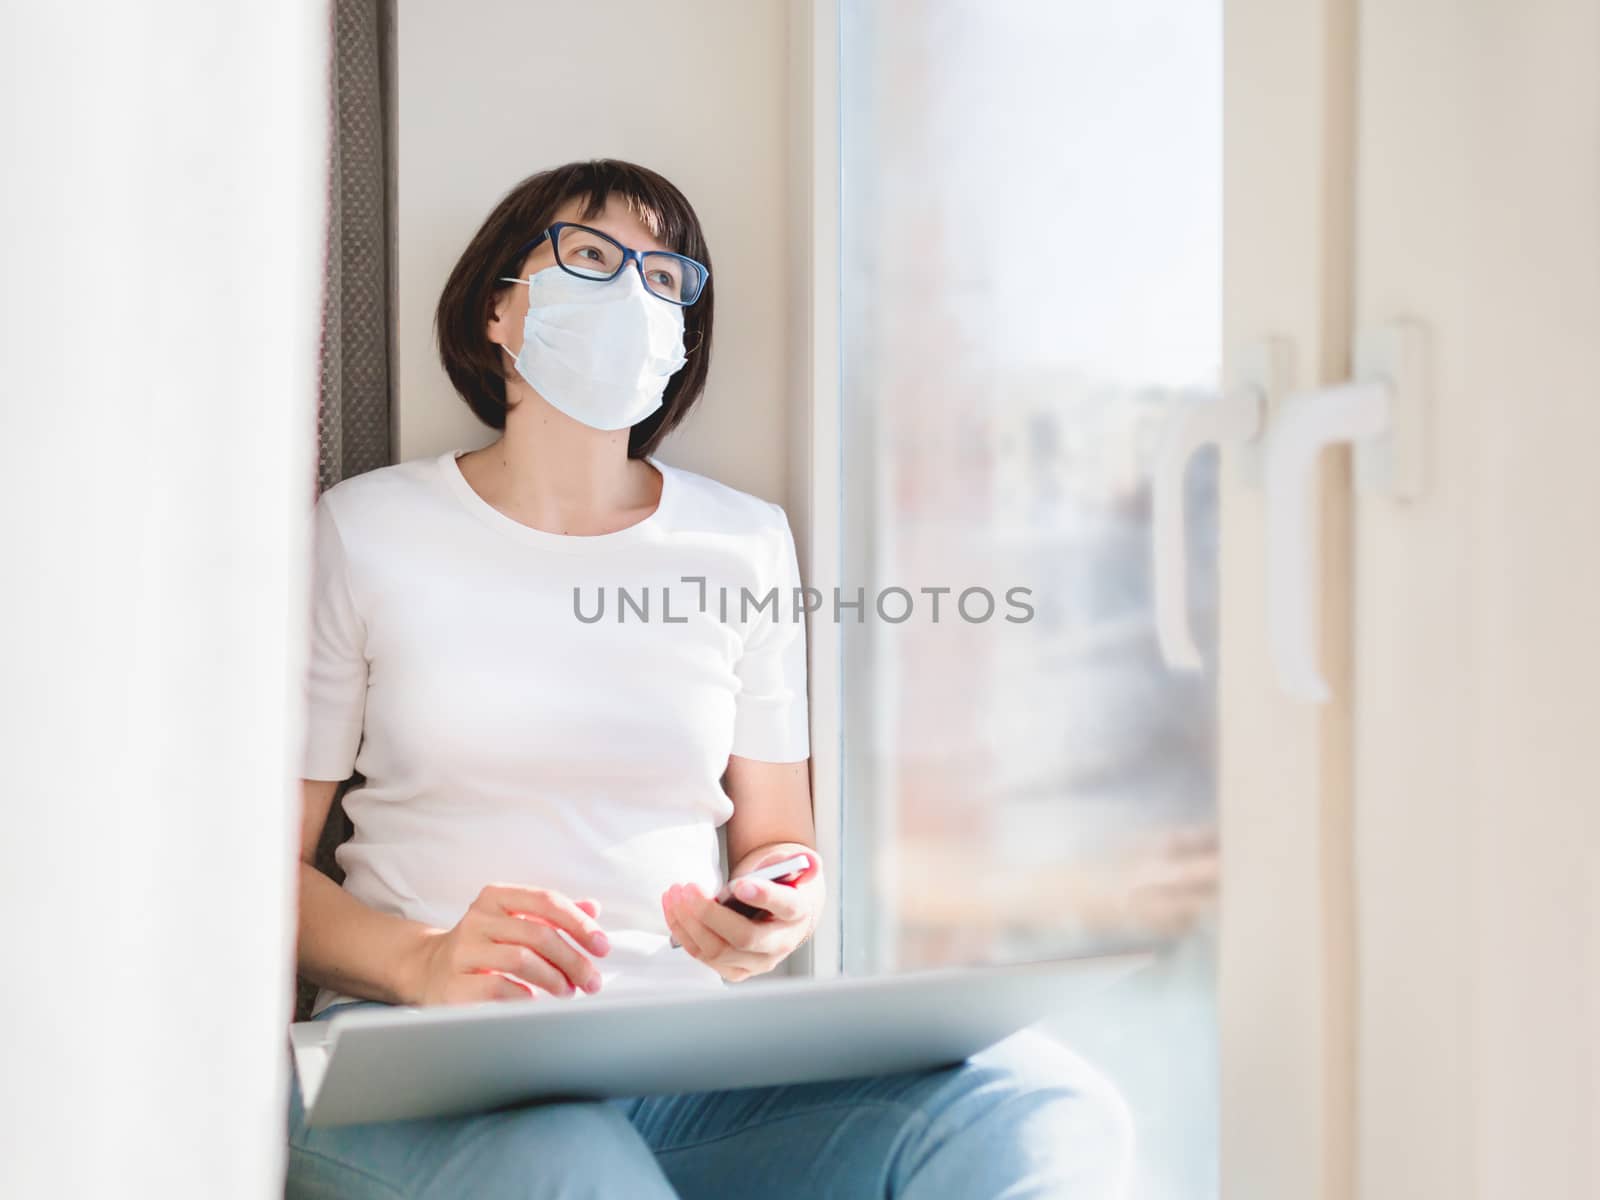 Woman in medical protective mask works remotely from home. She sits on window sill with smartphone and laptop on knees. Lockdown quarantine because of coronavirus COVID19.